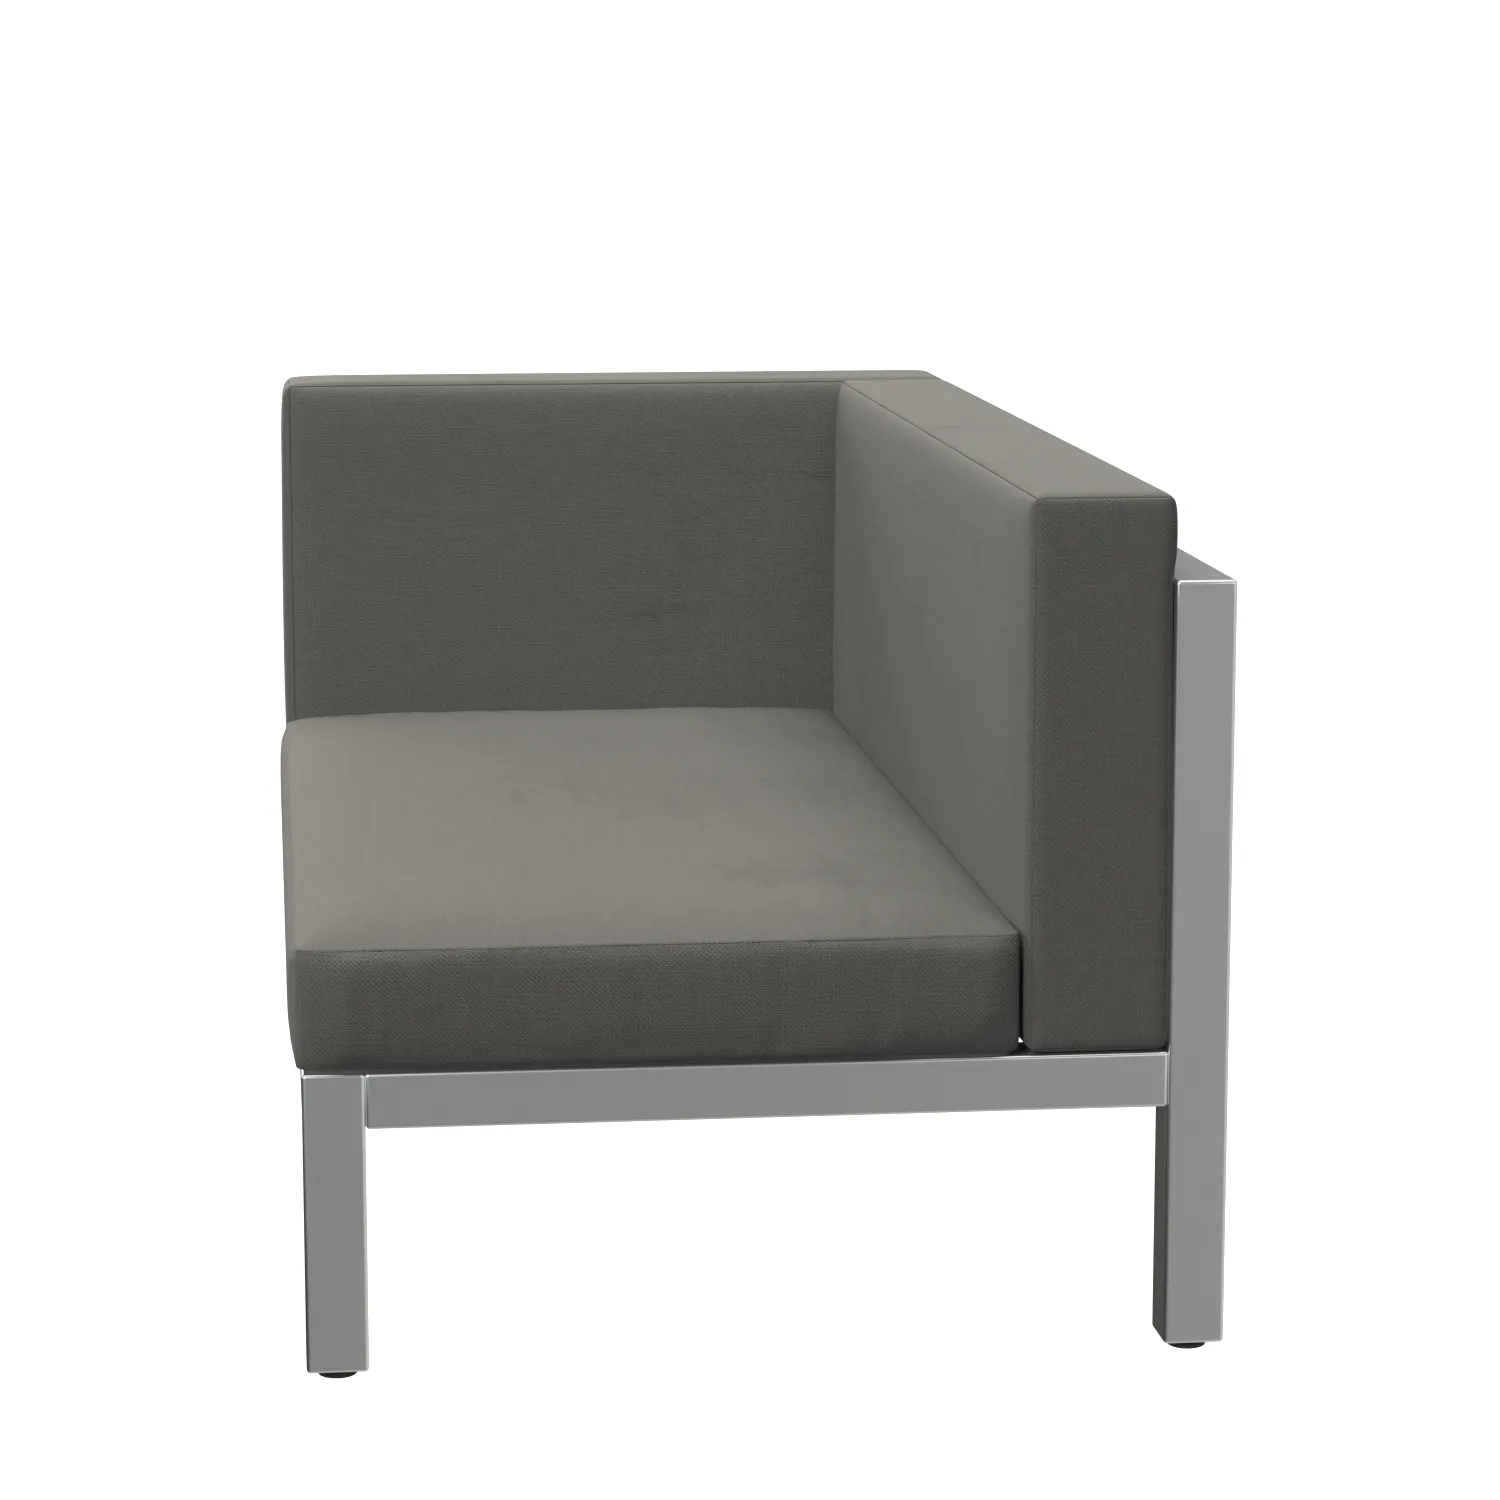 Metal Base And Upholstred Seat Sectional Sofa PBR 3D Model_03